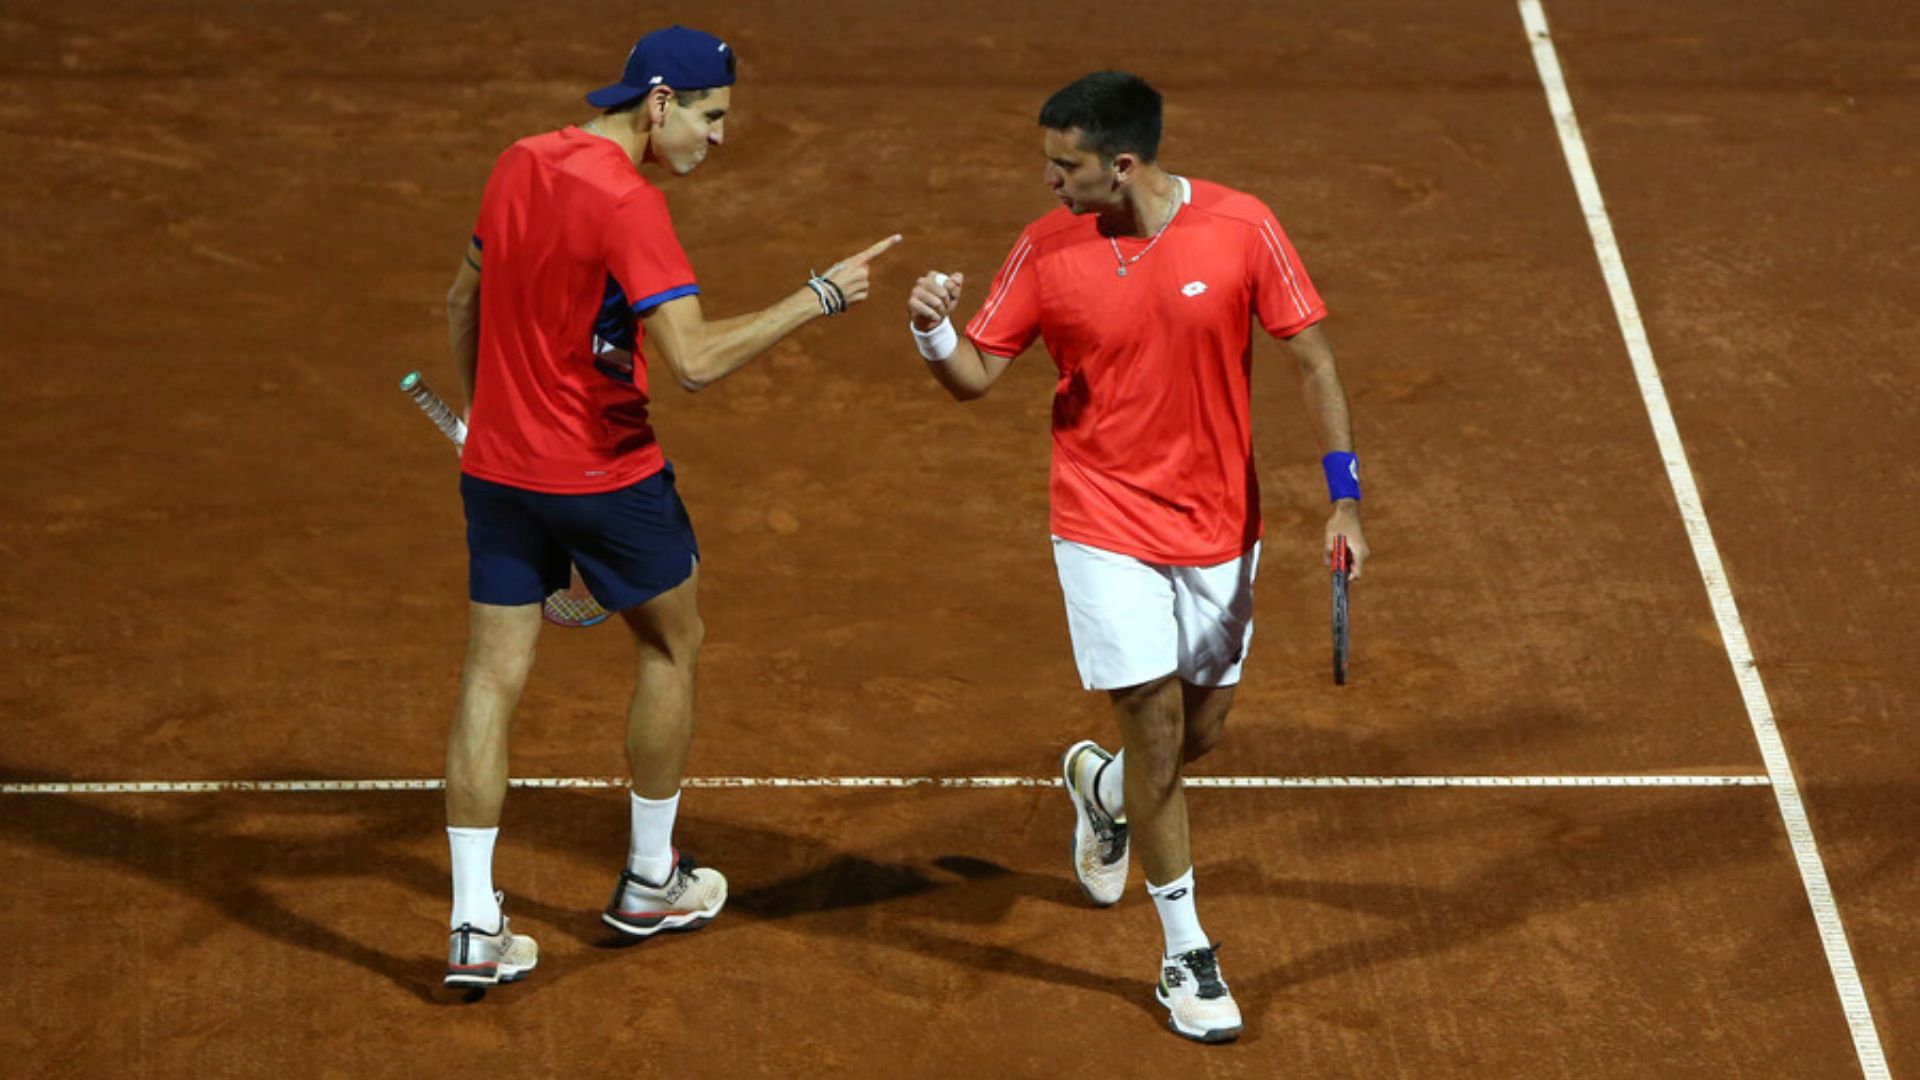 Chile seeks gold in male's doubles after victory over Costa Rica